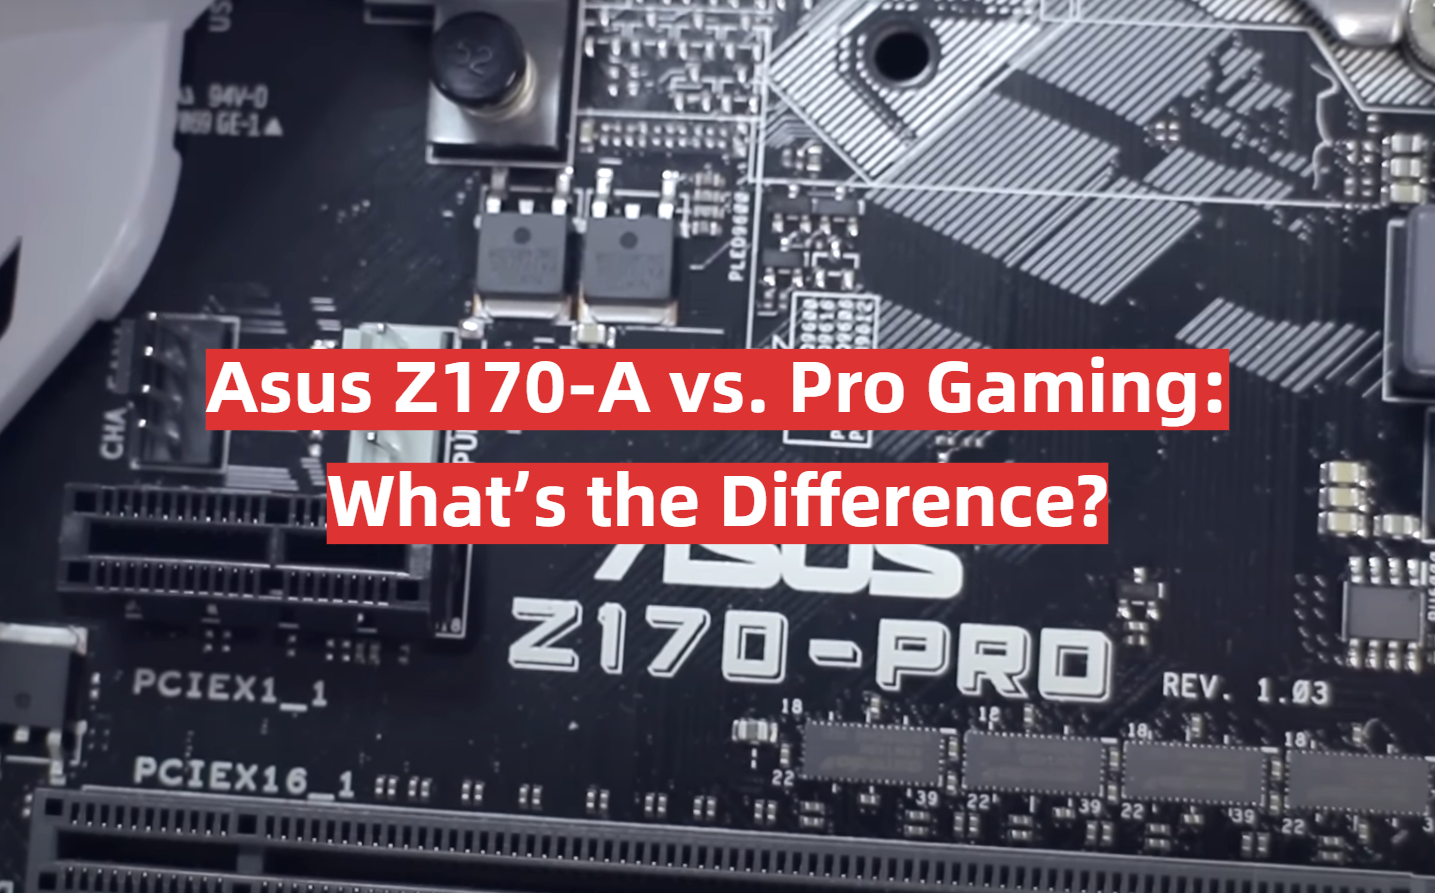 Asus Z170-A vs. Pro Gaming: What’s the Difference?